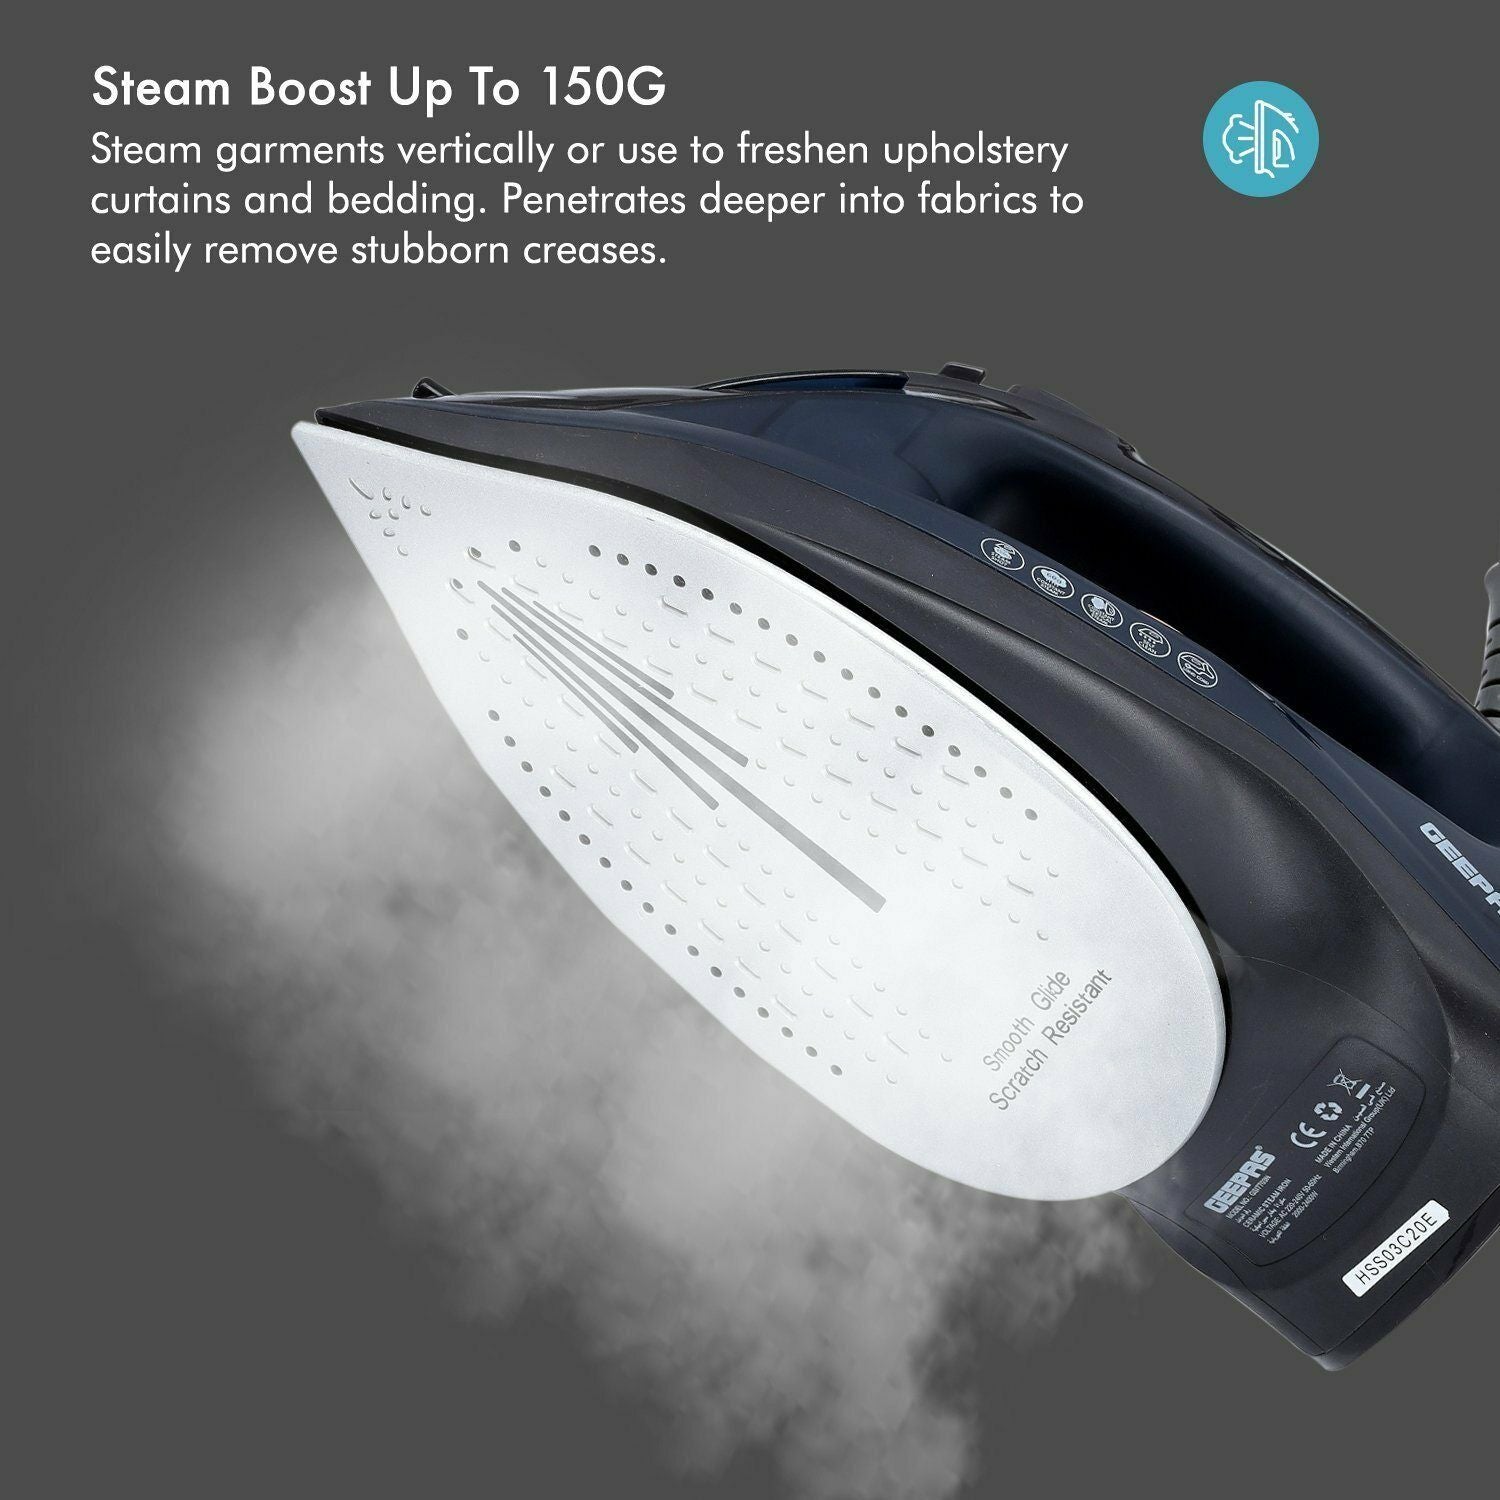 Geepas 2400W Iron Soleplate Power Steam | reliable performance | lightweight | variable steam settings | safety features | stylish | even heat distribution | Halabh.com